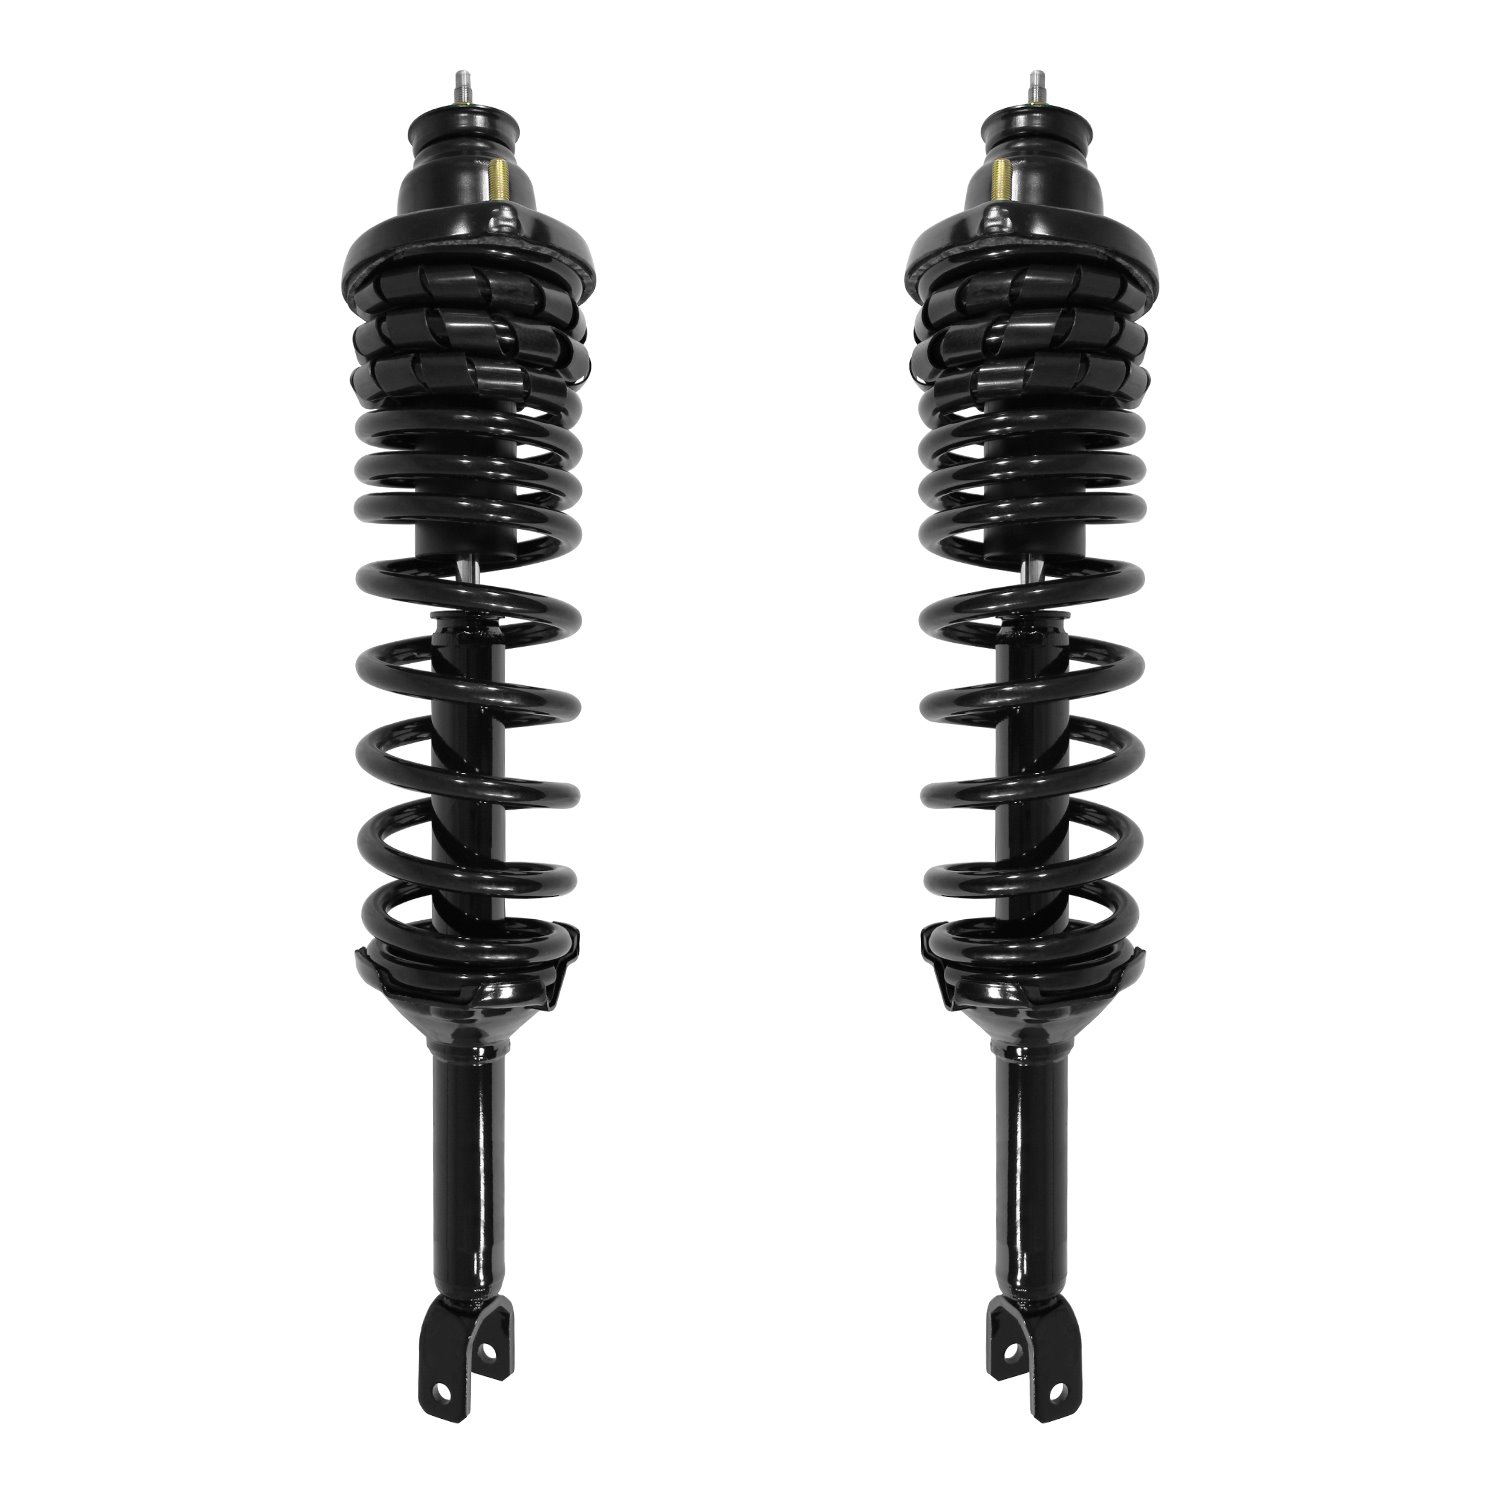 2-15141-15142-001 Suspension Strut & Coil Spring Assembly Set Fits Select Acura CL, Honda Accord